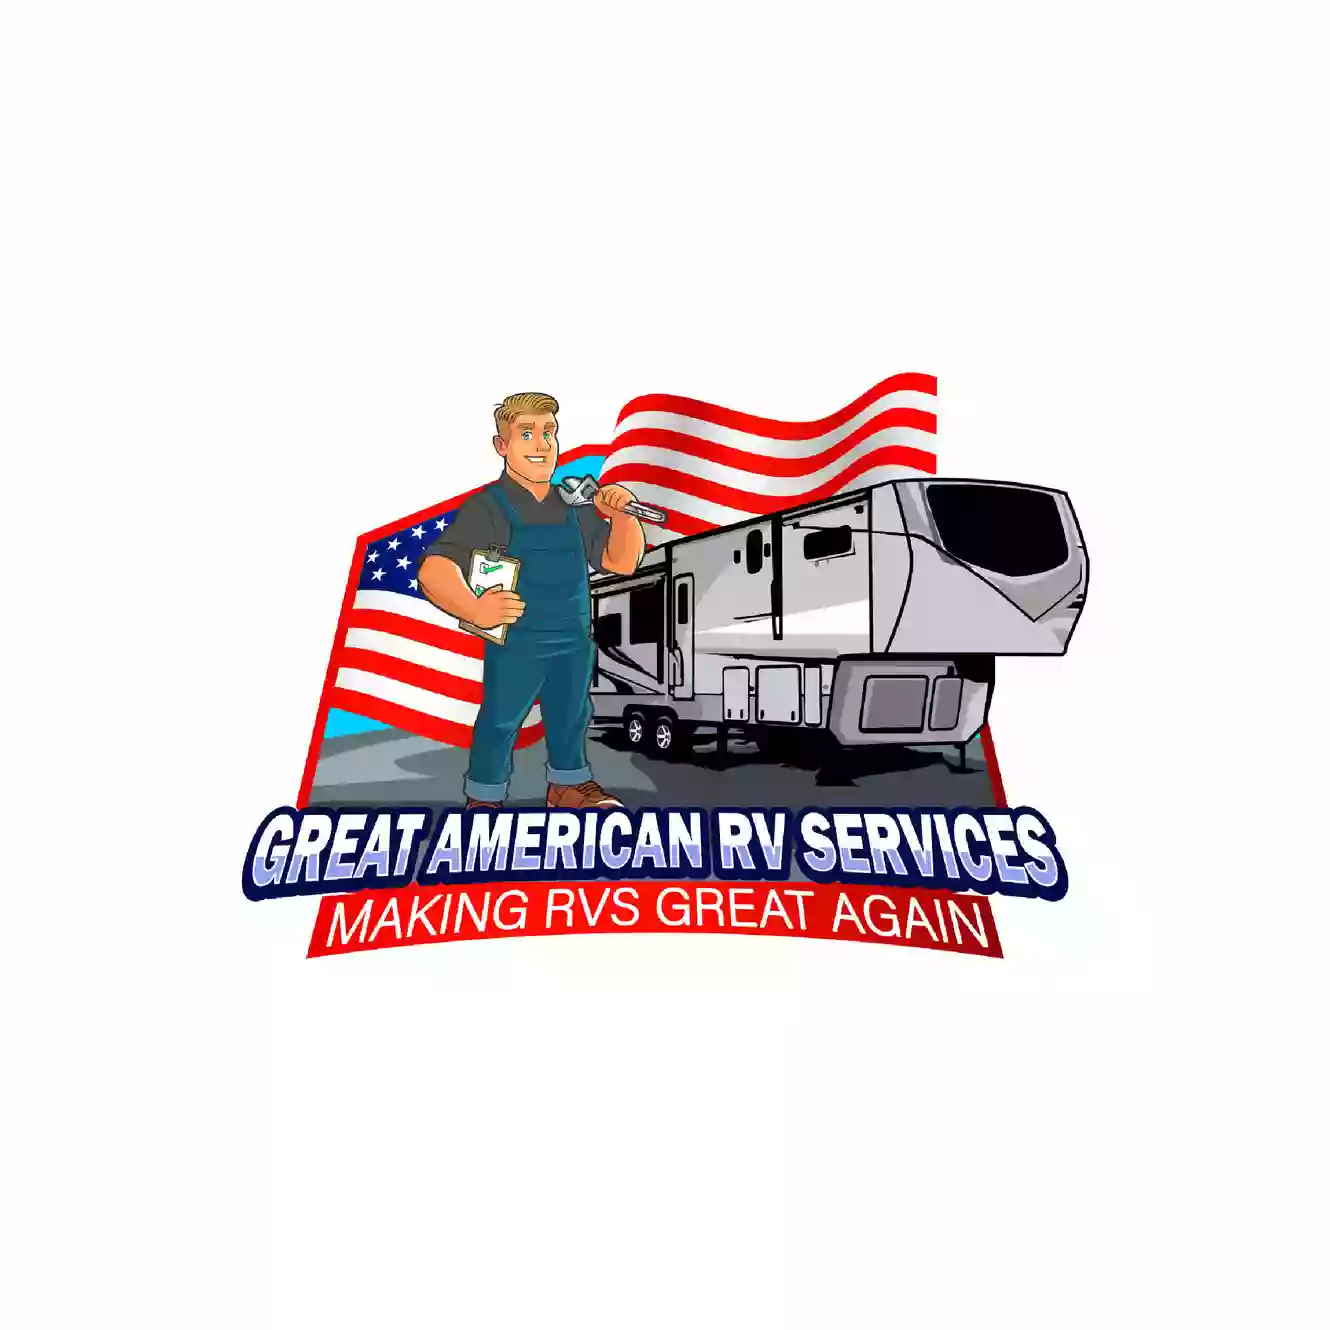 Great American RV Services